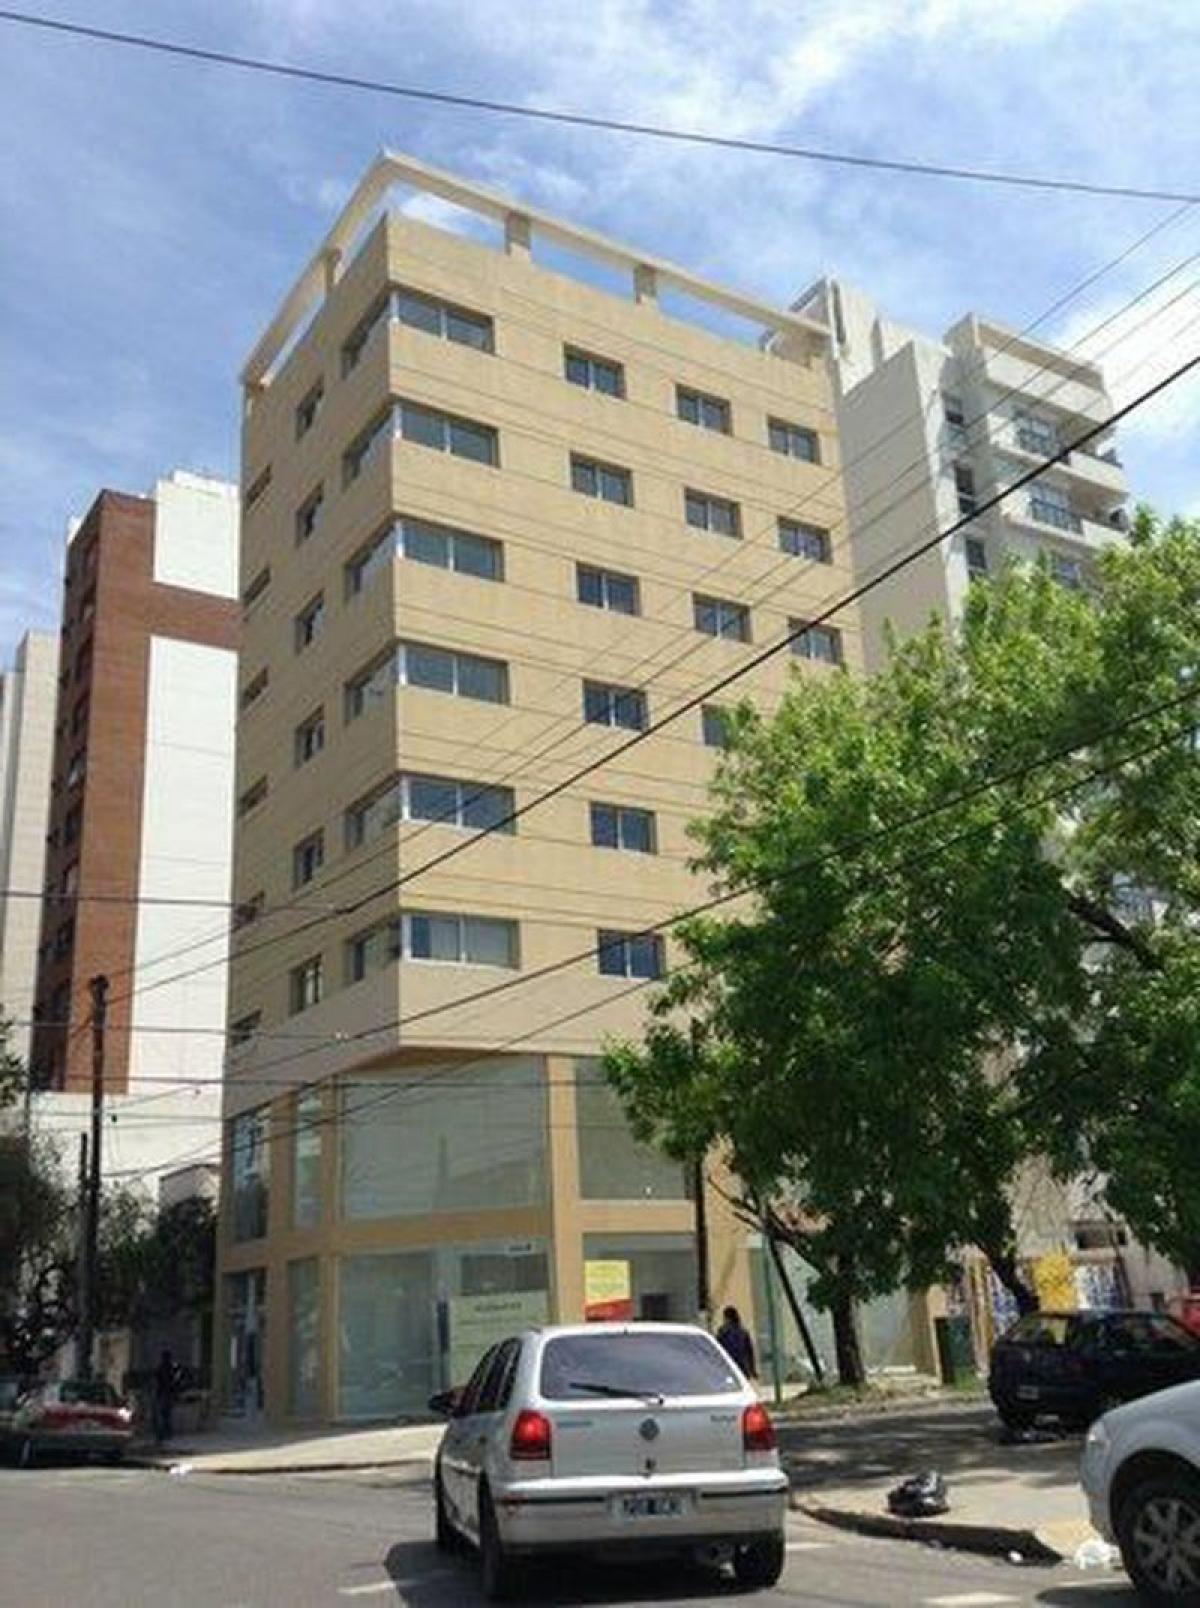 Picture of Office For Sale in Lomas De Zamora, Buenos Aires, Argentina